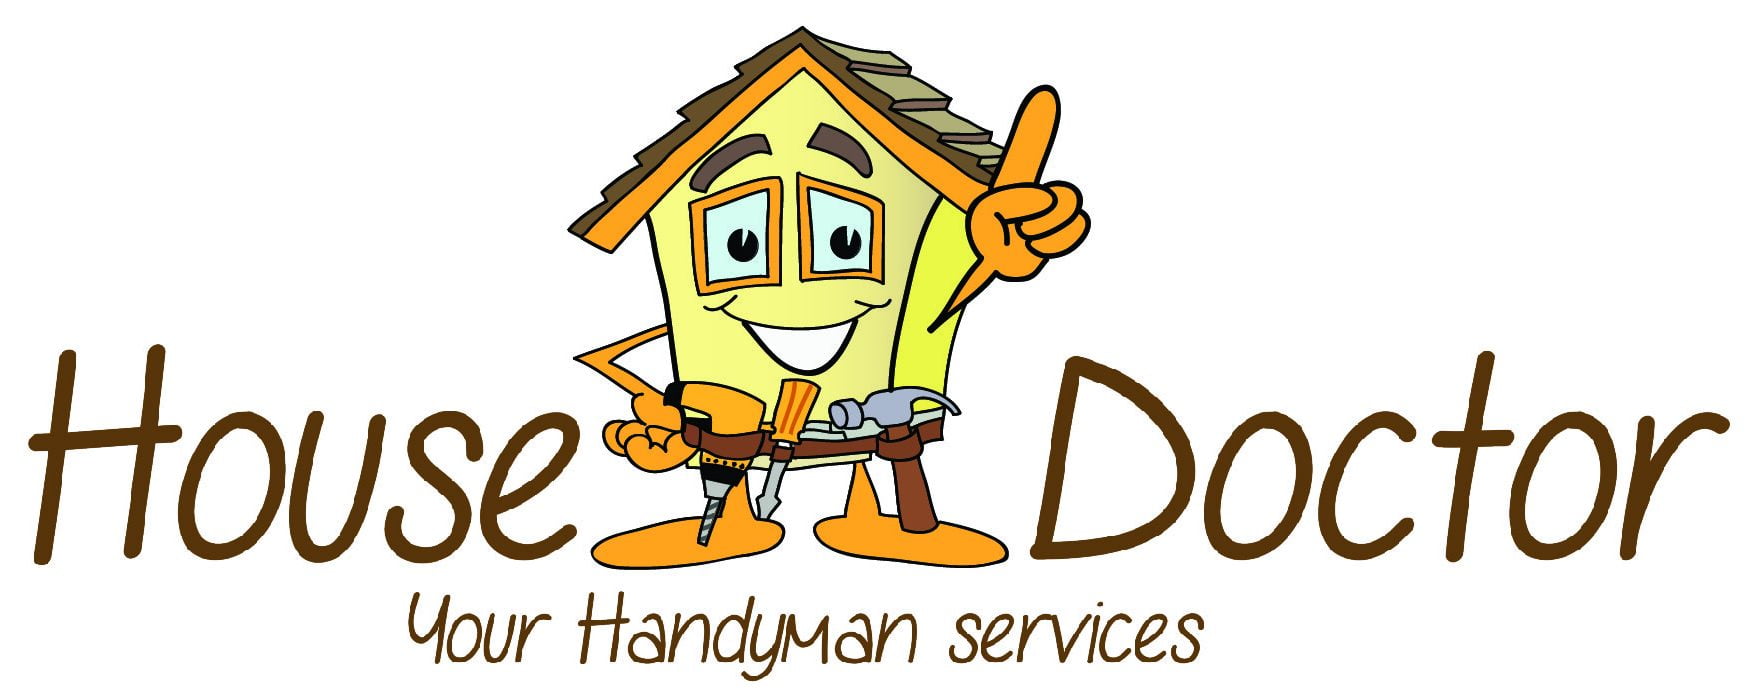 Professional Handyman Services in Tallaght